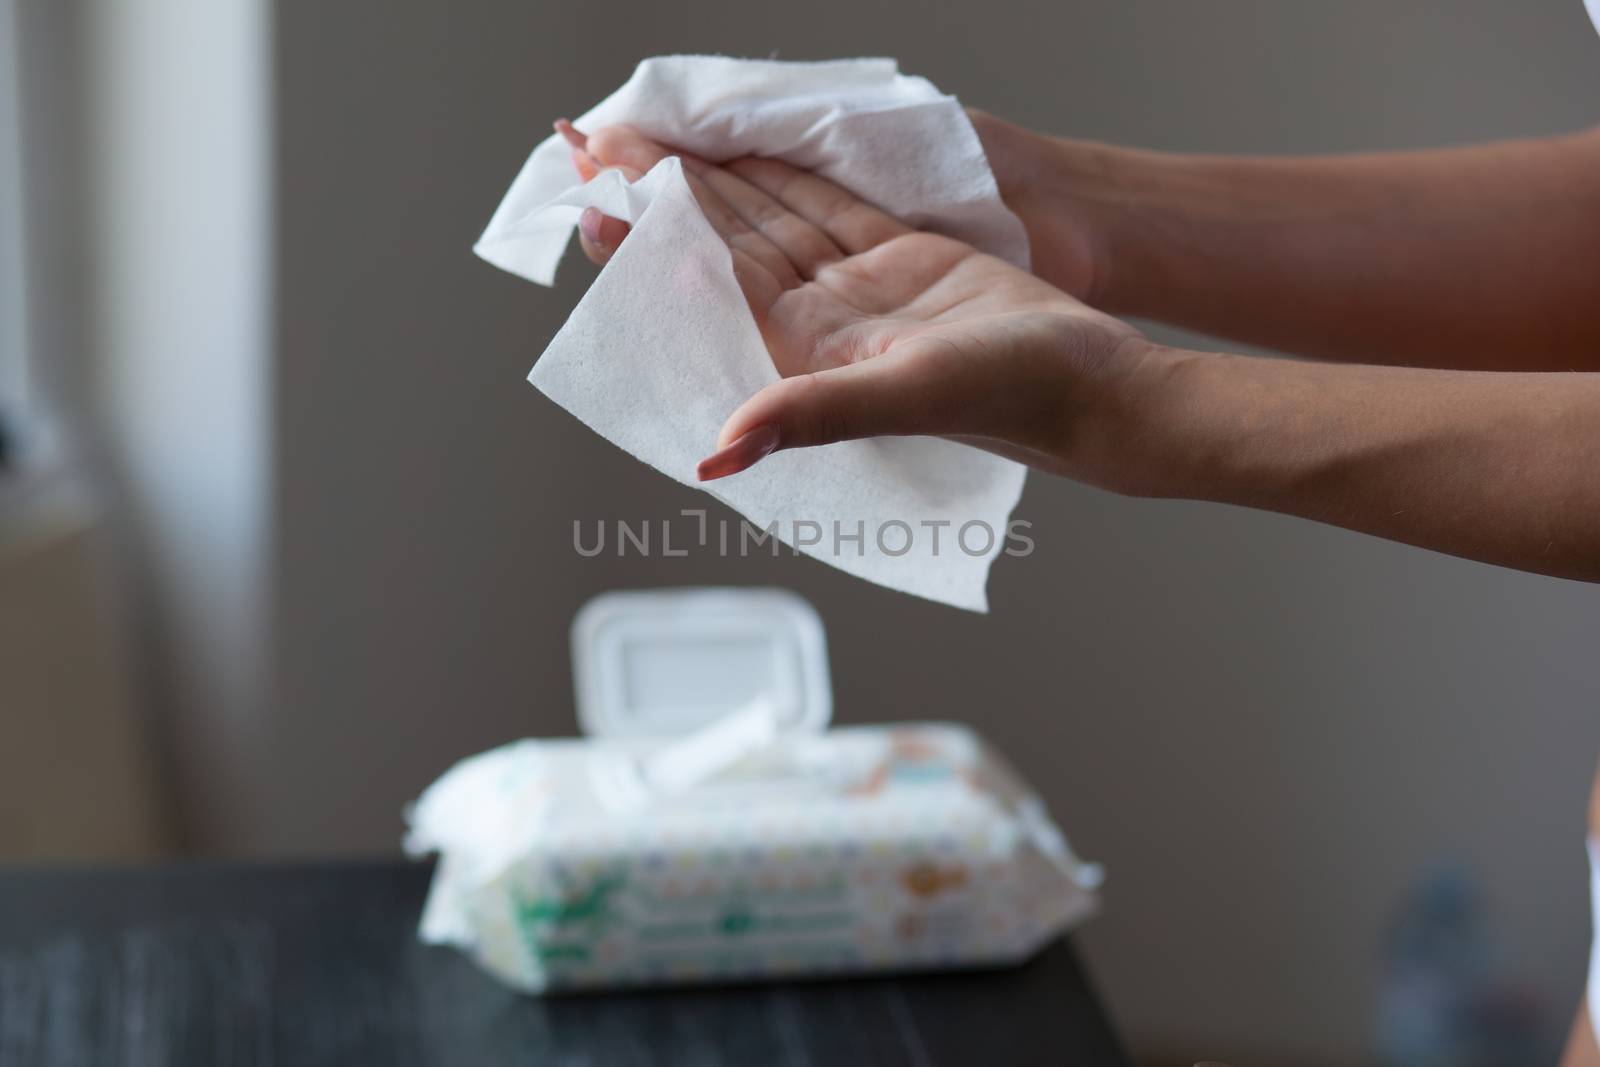 Young woman clean hands with wet wipes, blurrer package in background